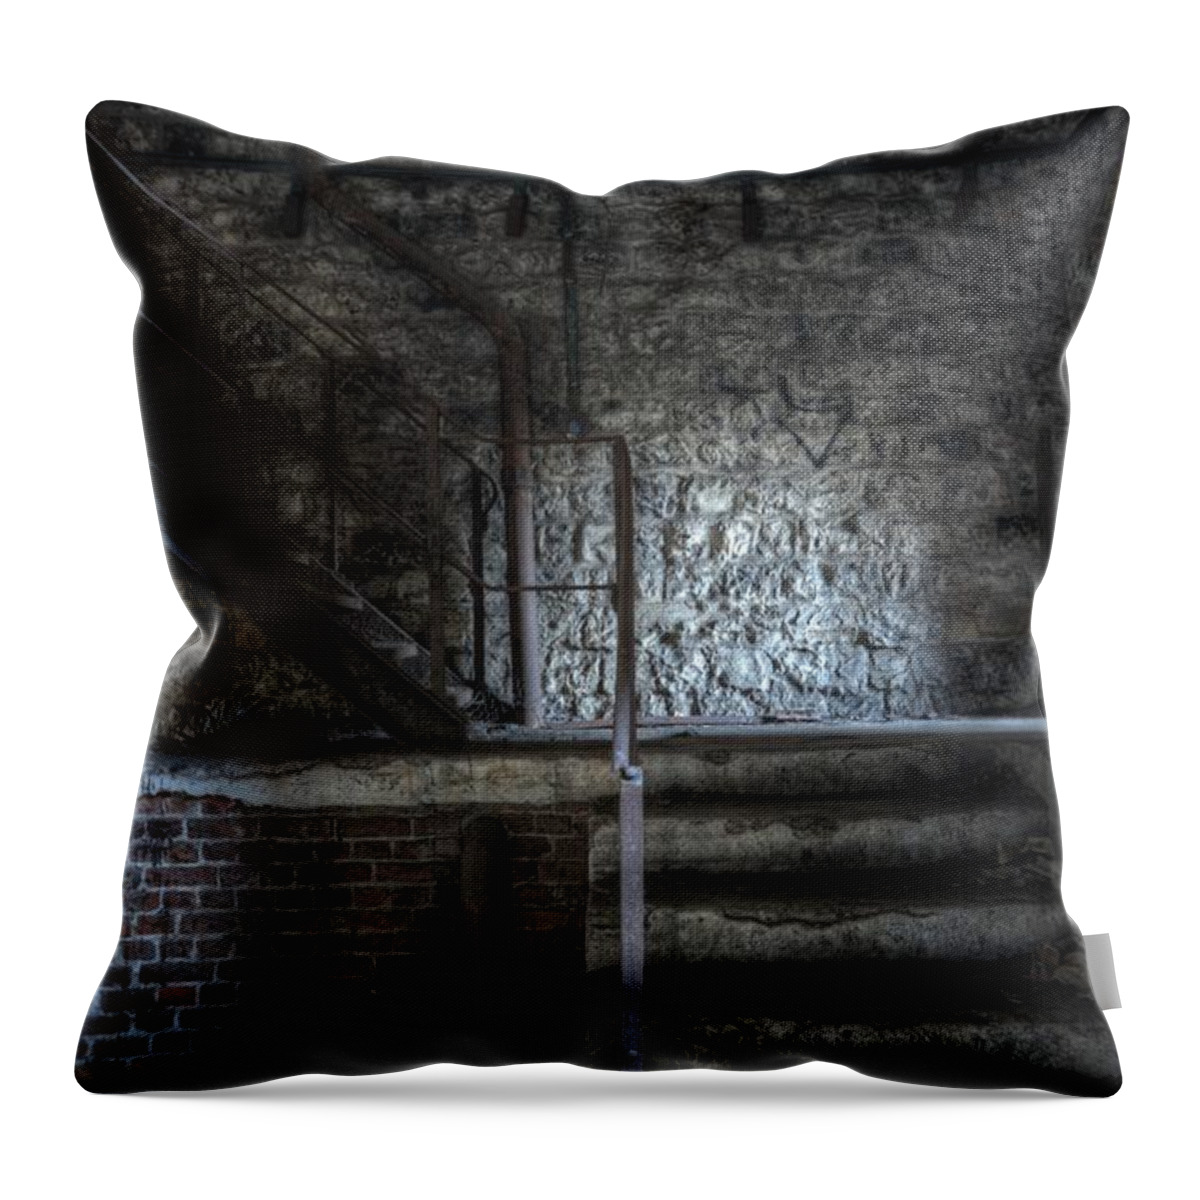 Urbex Throw Pillow featuring the digital art Pit head by Nathan Wright